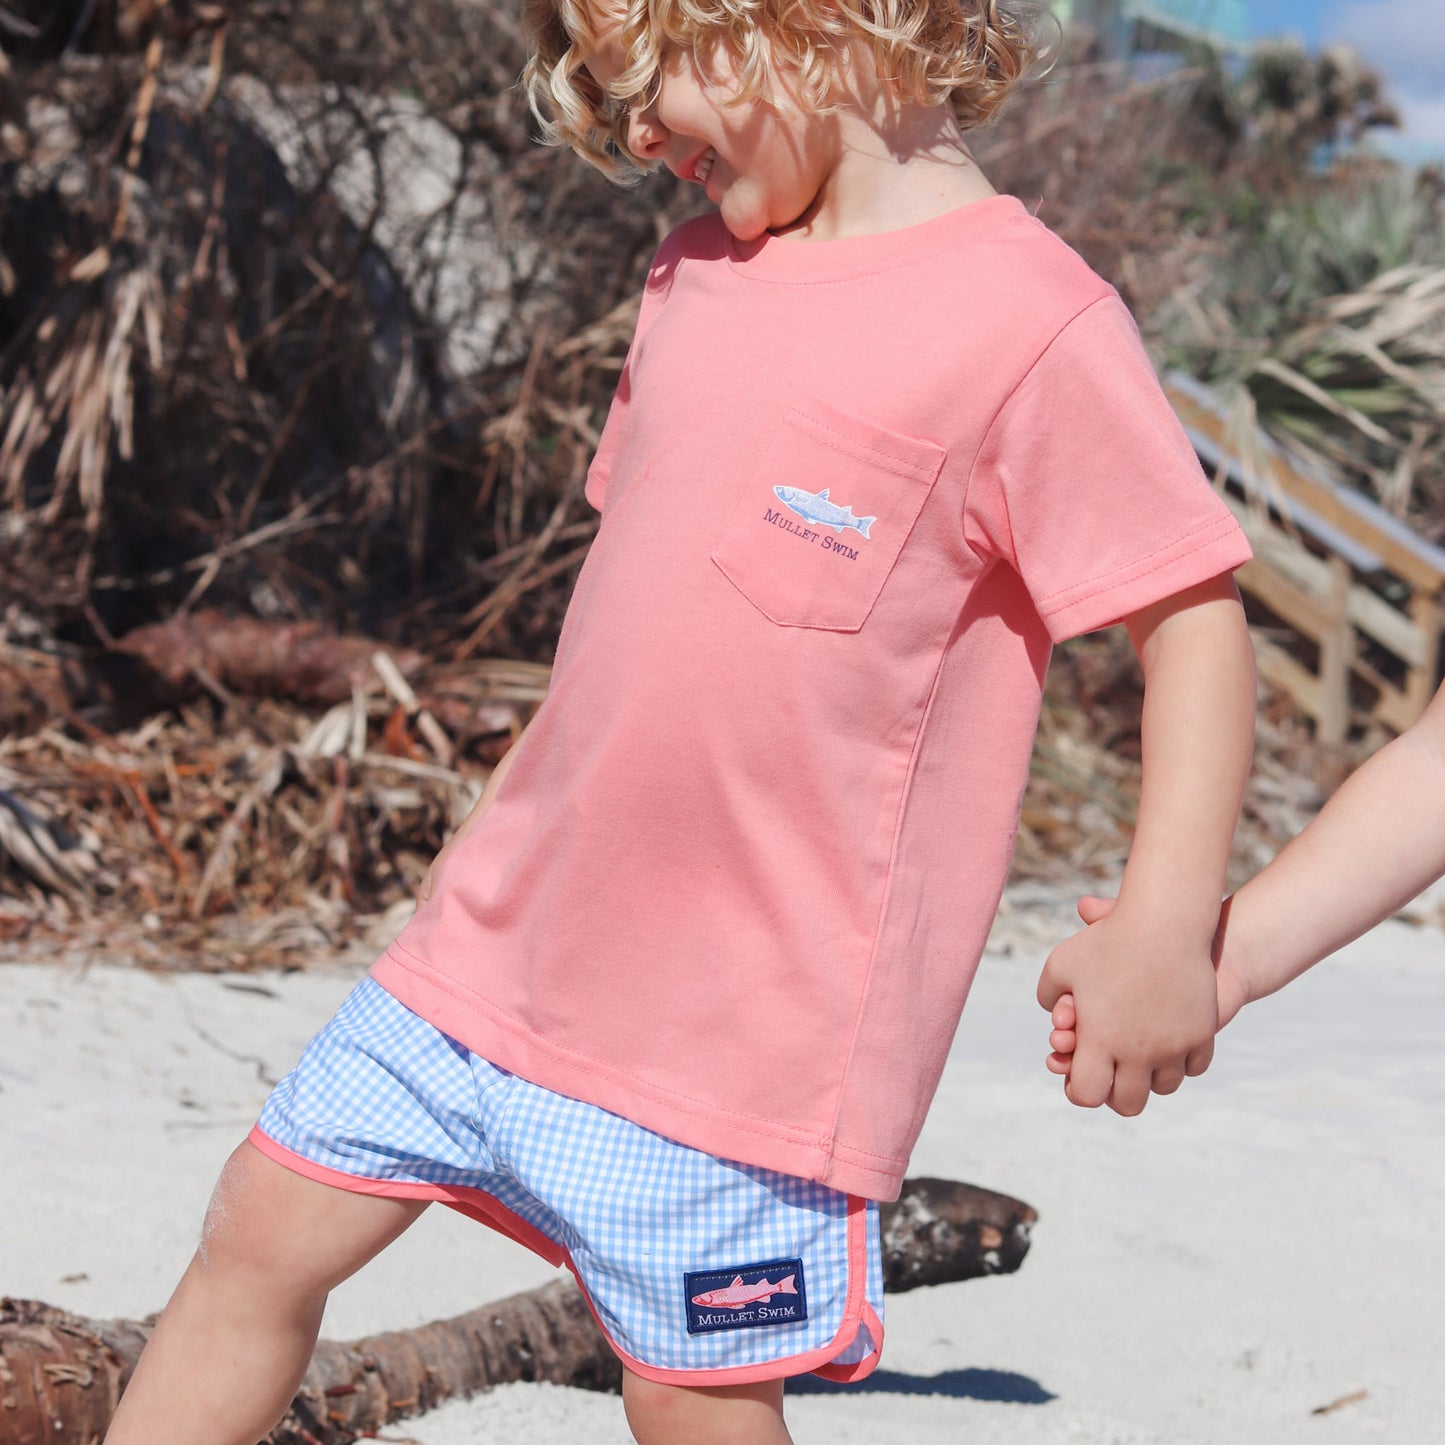 little boy holding hands with his sister wearing Big Catch Boy's Pocket Tee